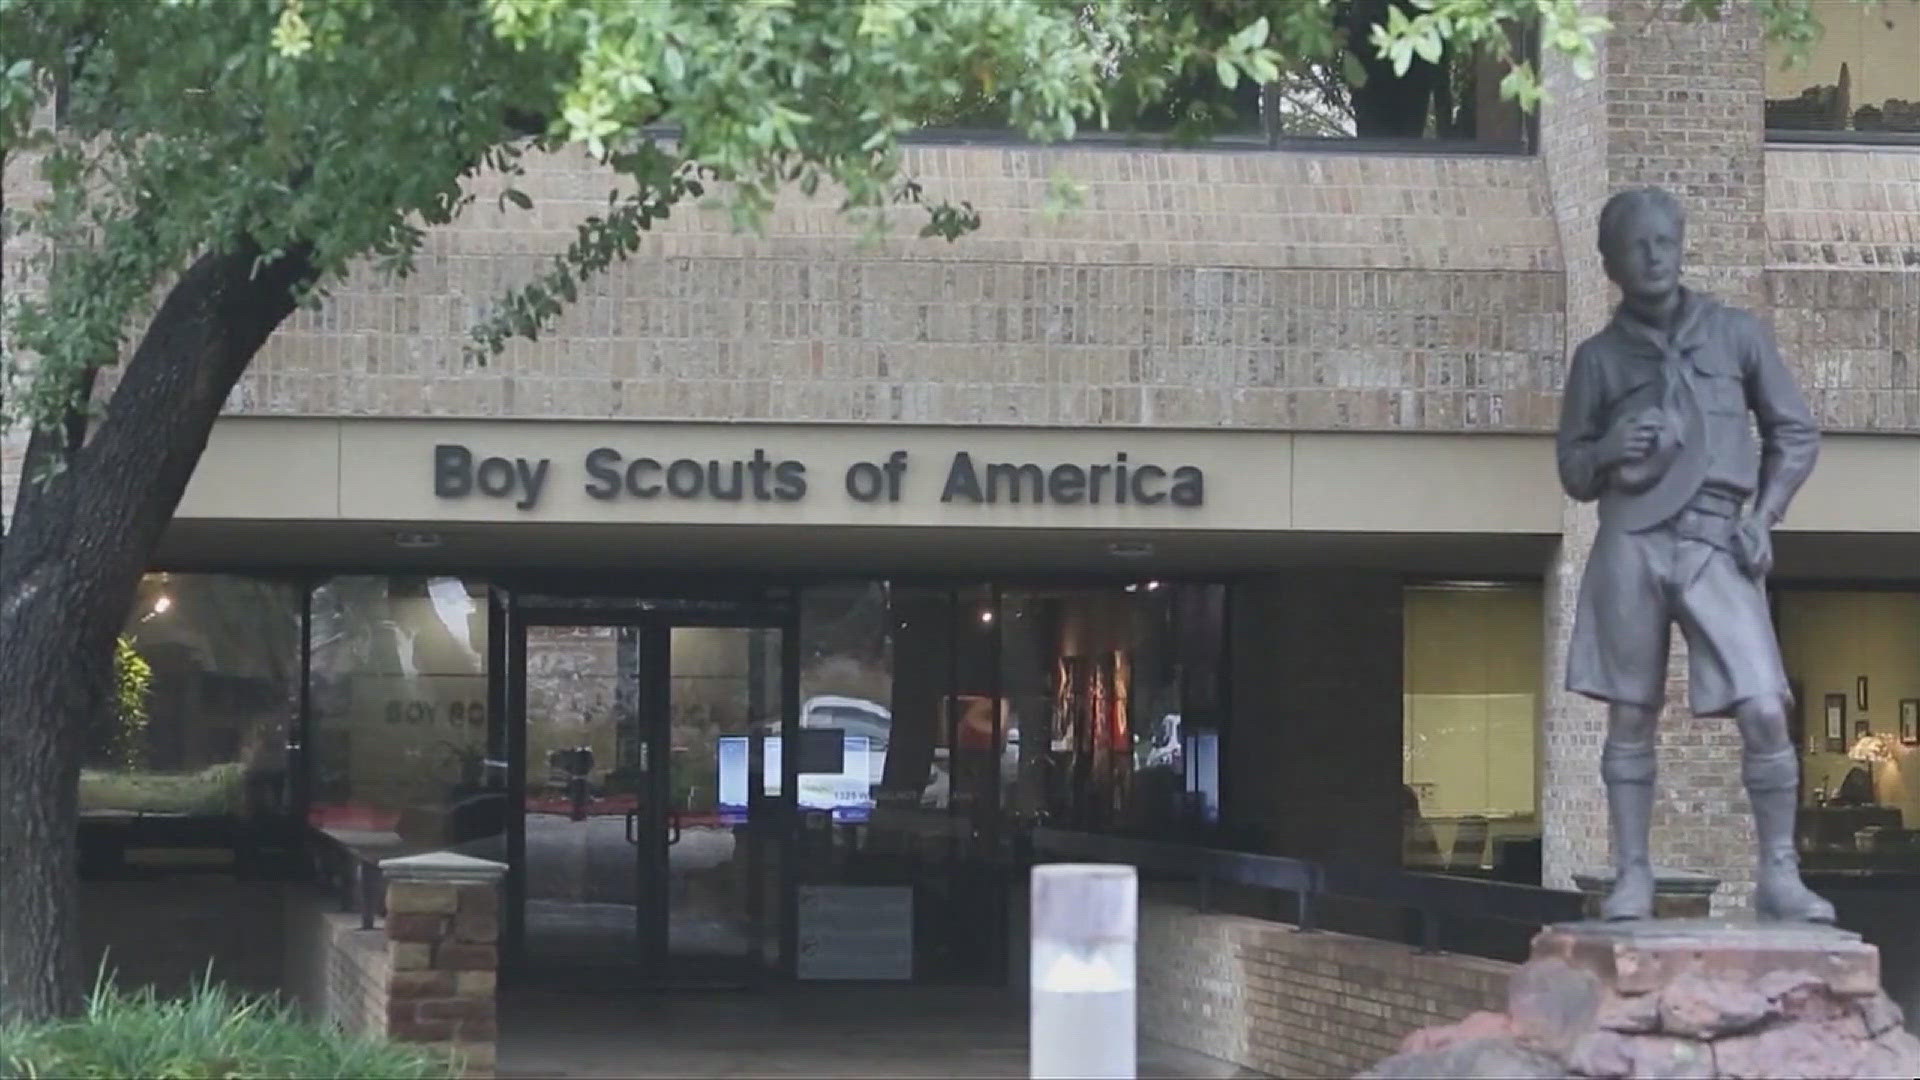 After 114 years 'Boy Scouts of America' will soon be 'Scouting America'